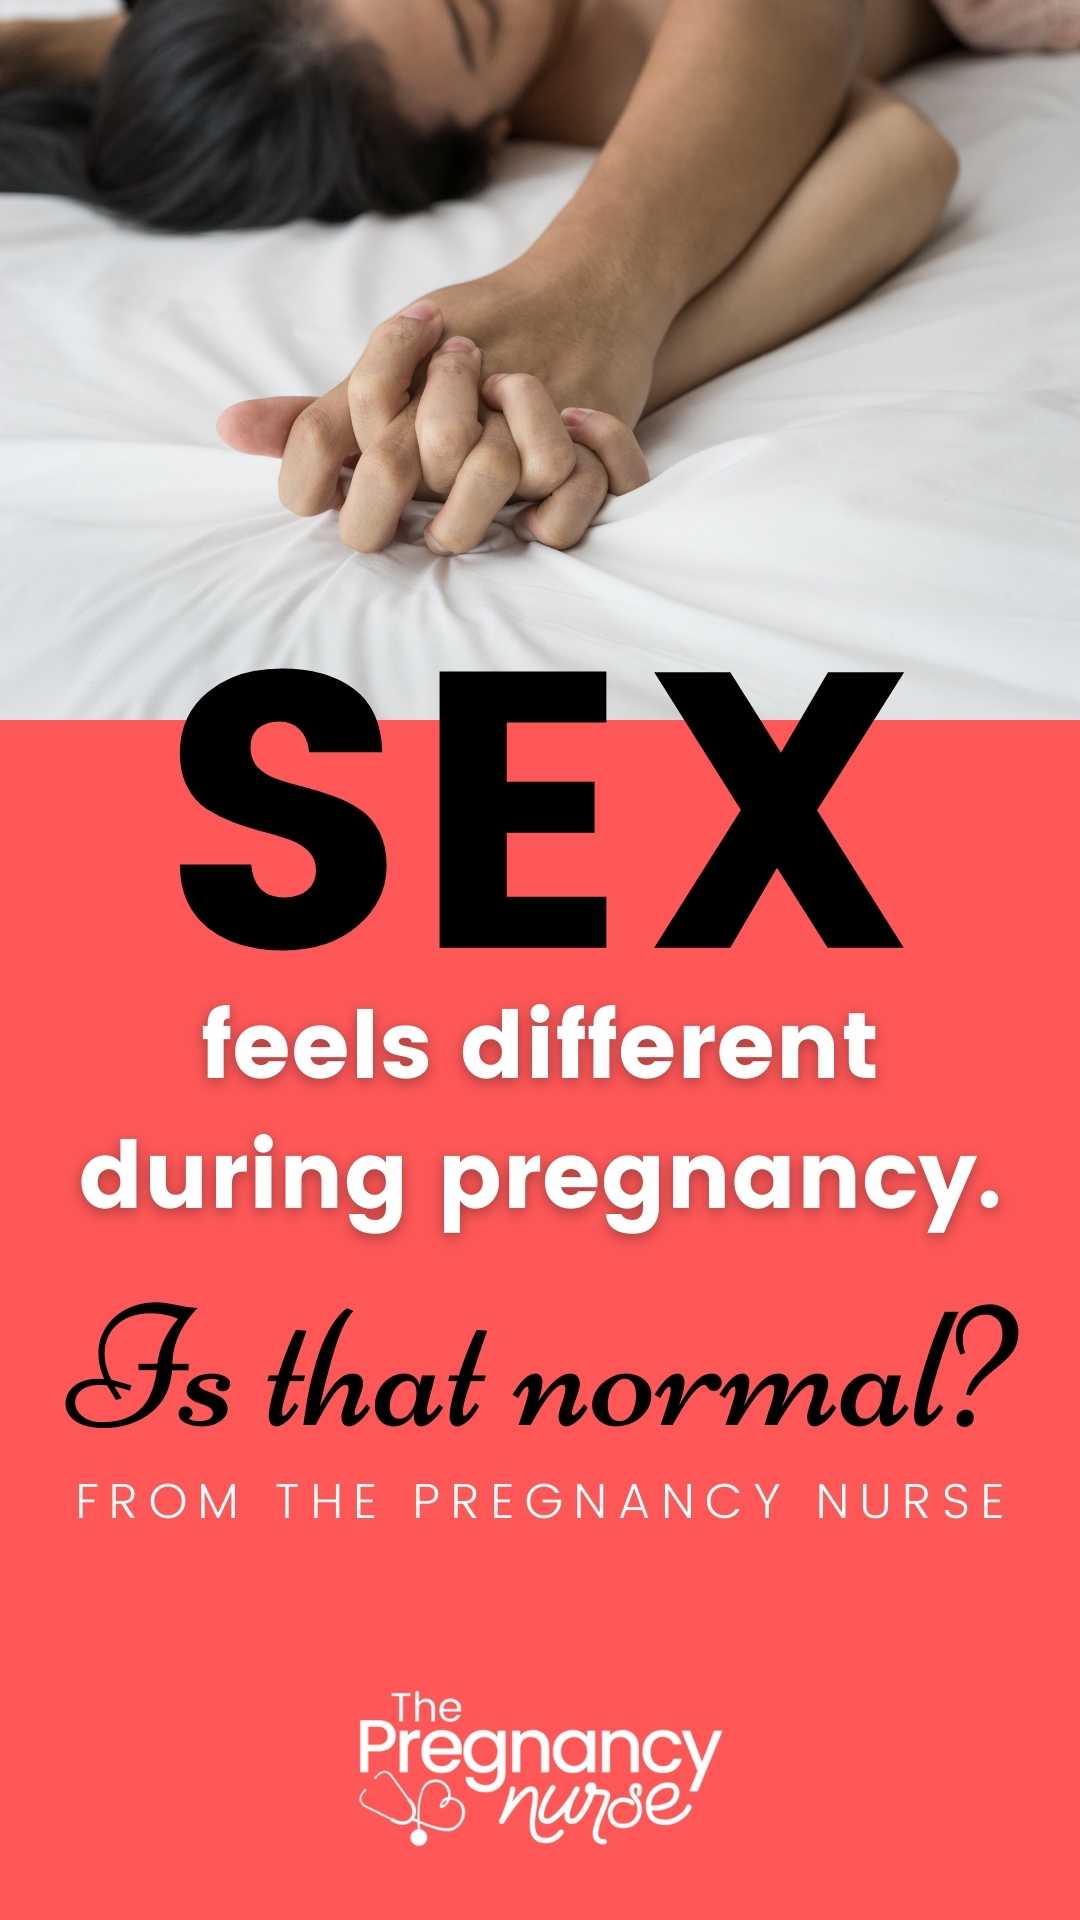 Your partner may think that you feel different "inside' when you're having intercourse. In fact, your orgasm may feel different inside during pregnancy. Plus, is sex safe during pregnancy?